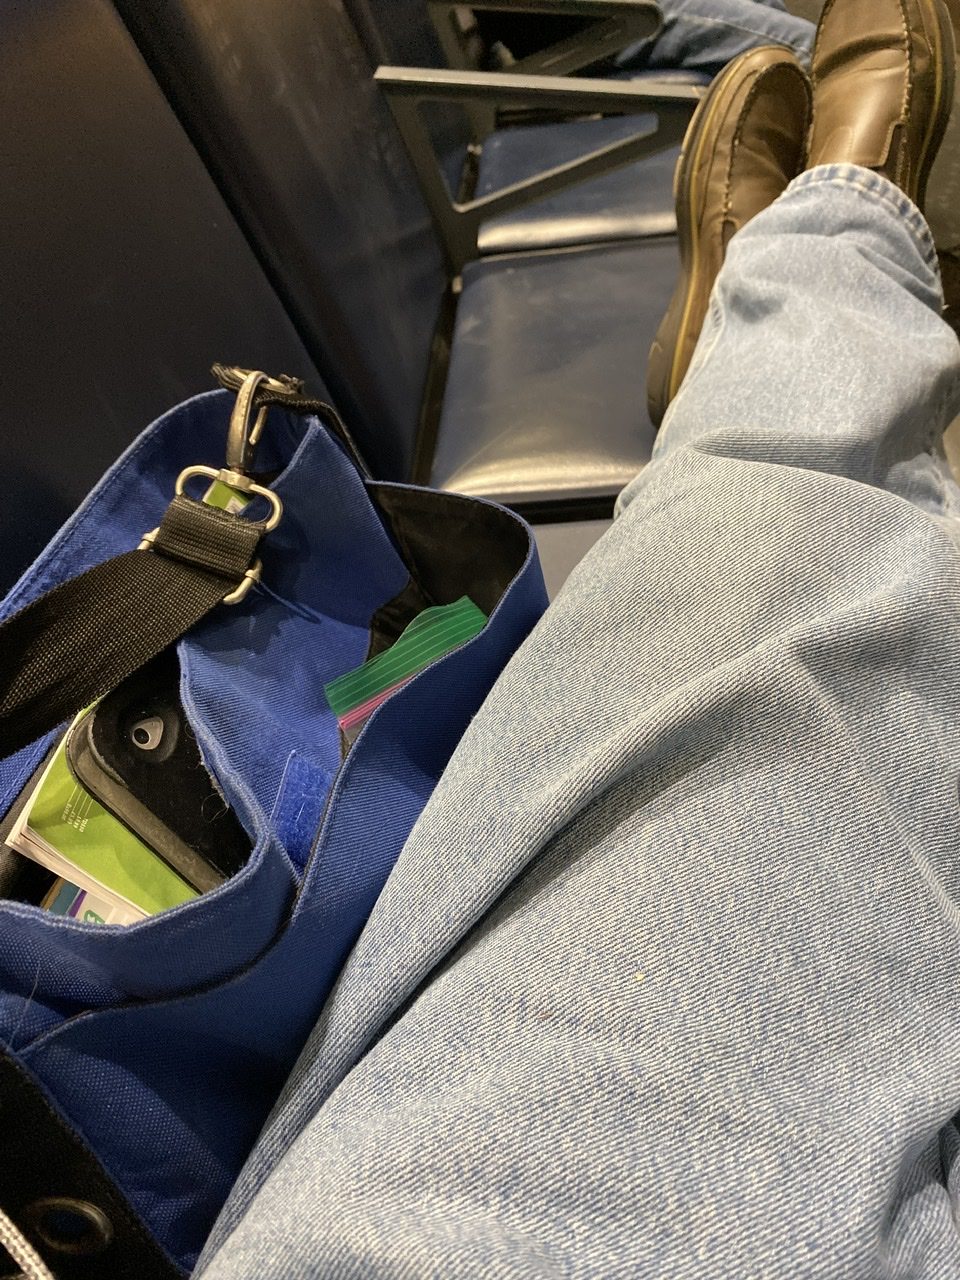 Denver Airport Photos – Sleeping in Airports